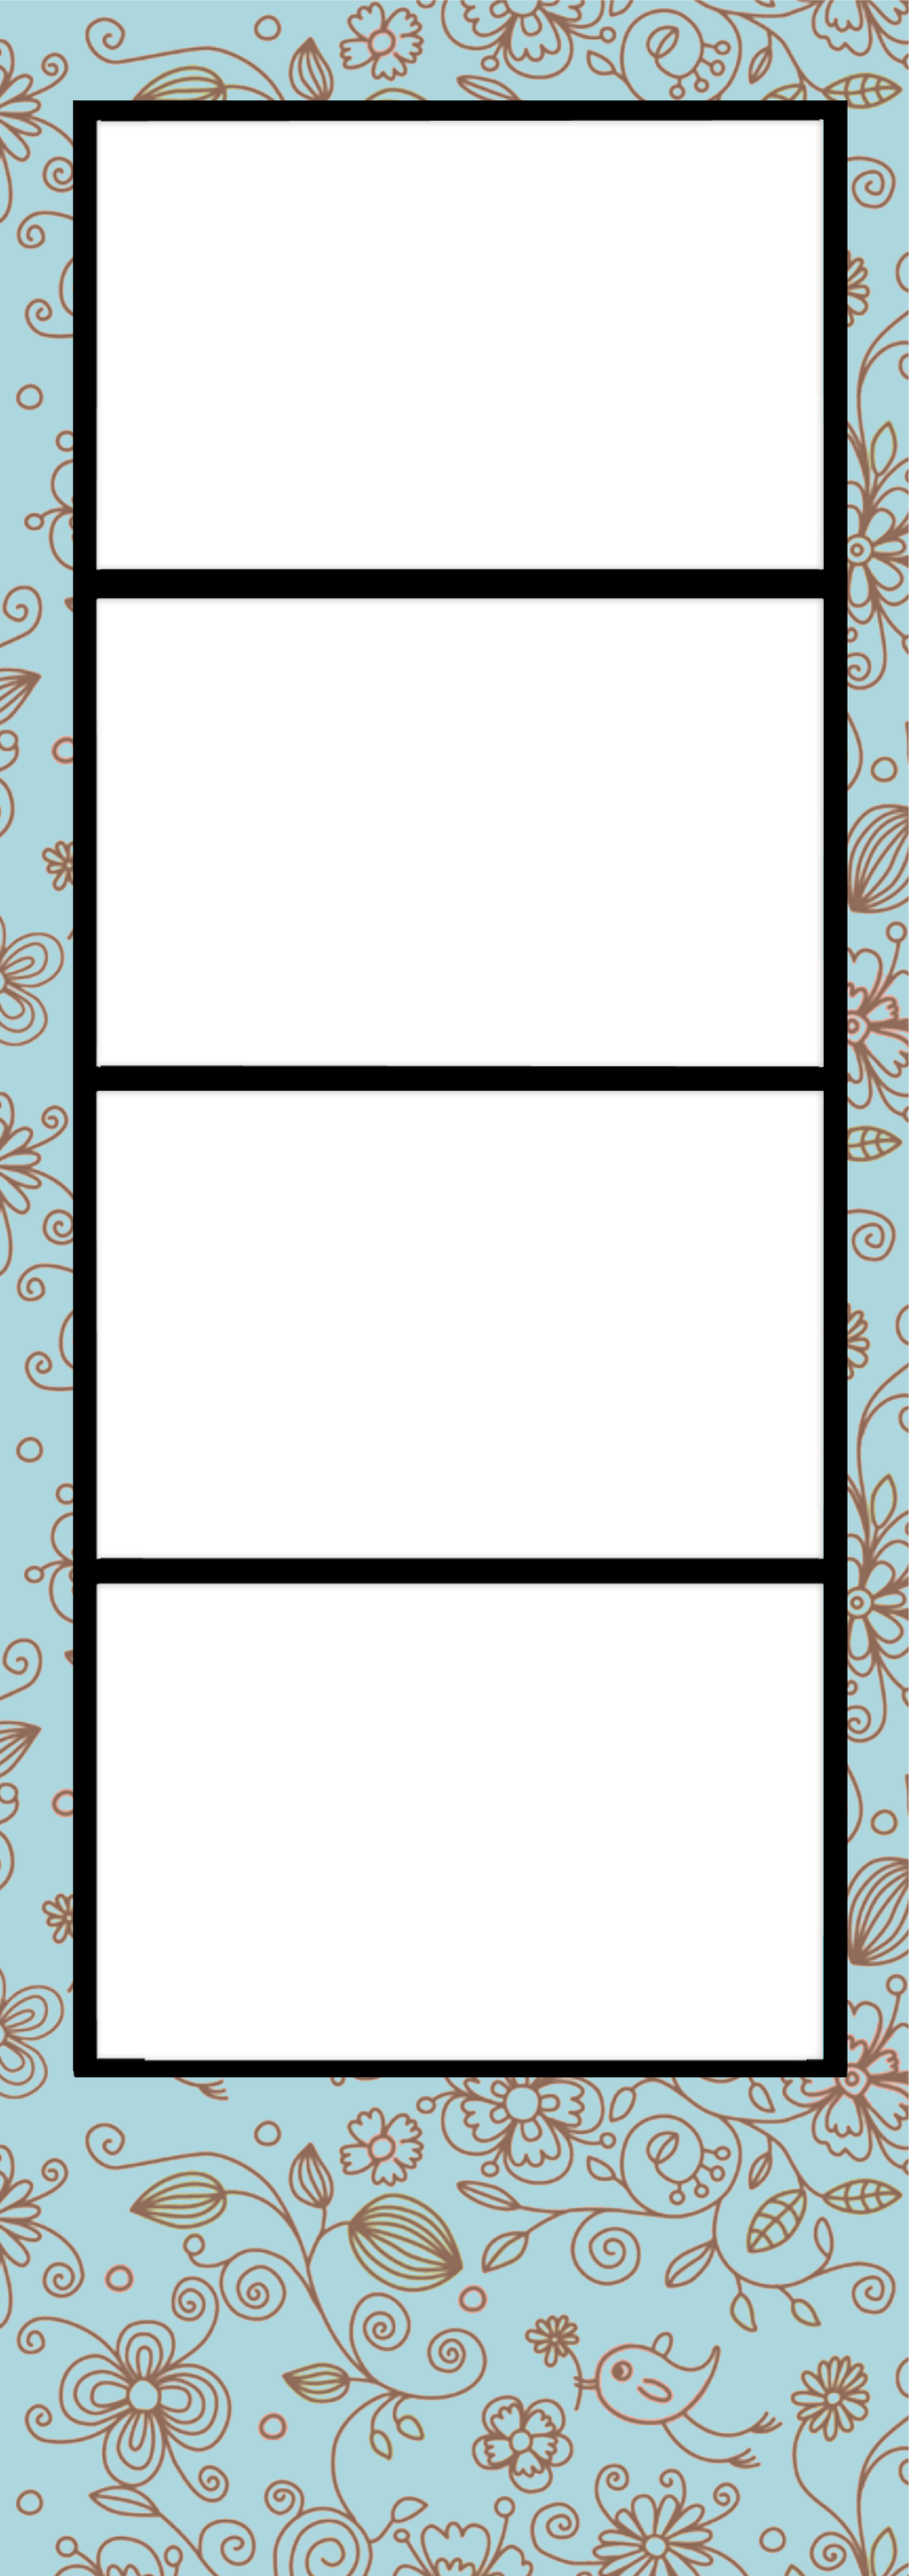 photo-booth-template-by-blissfullimaging-on-deviantart